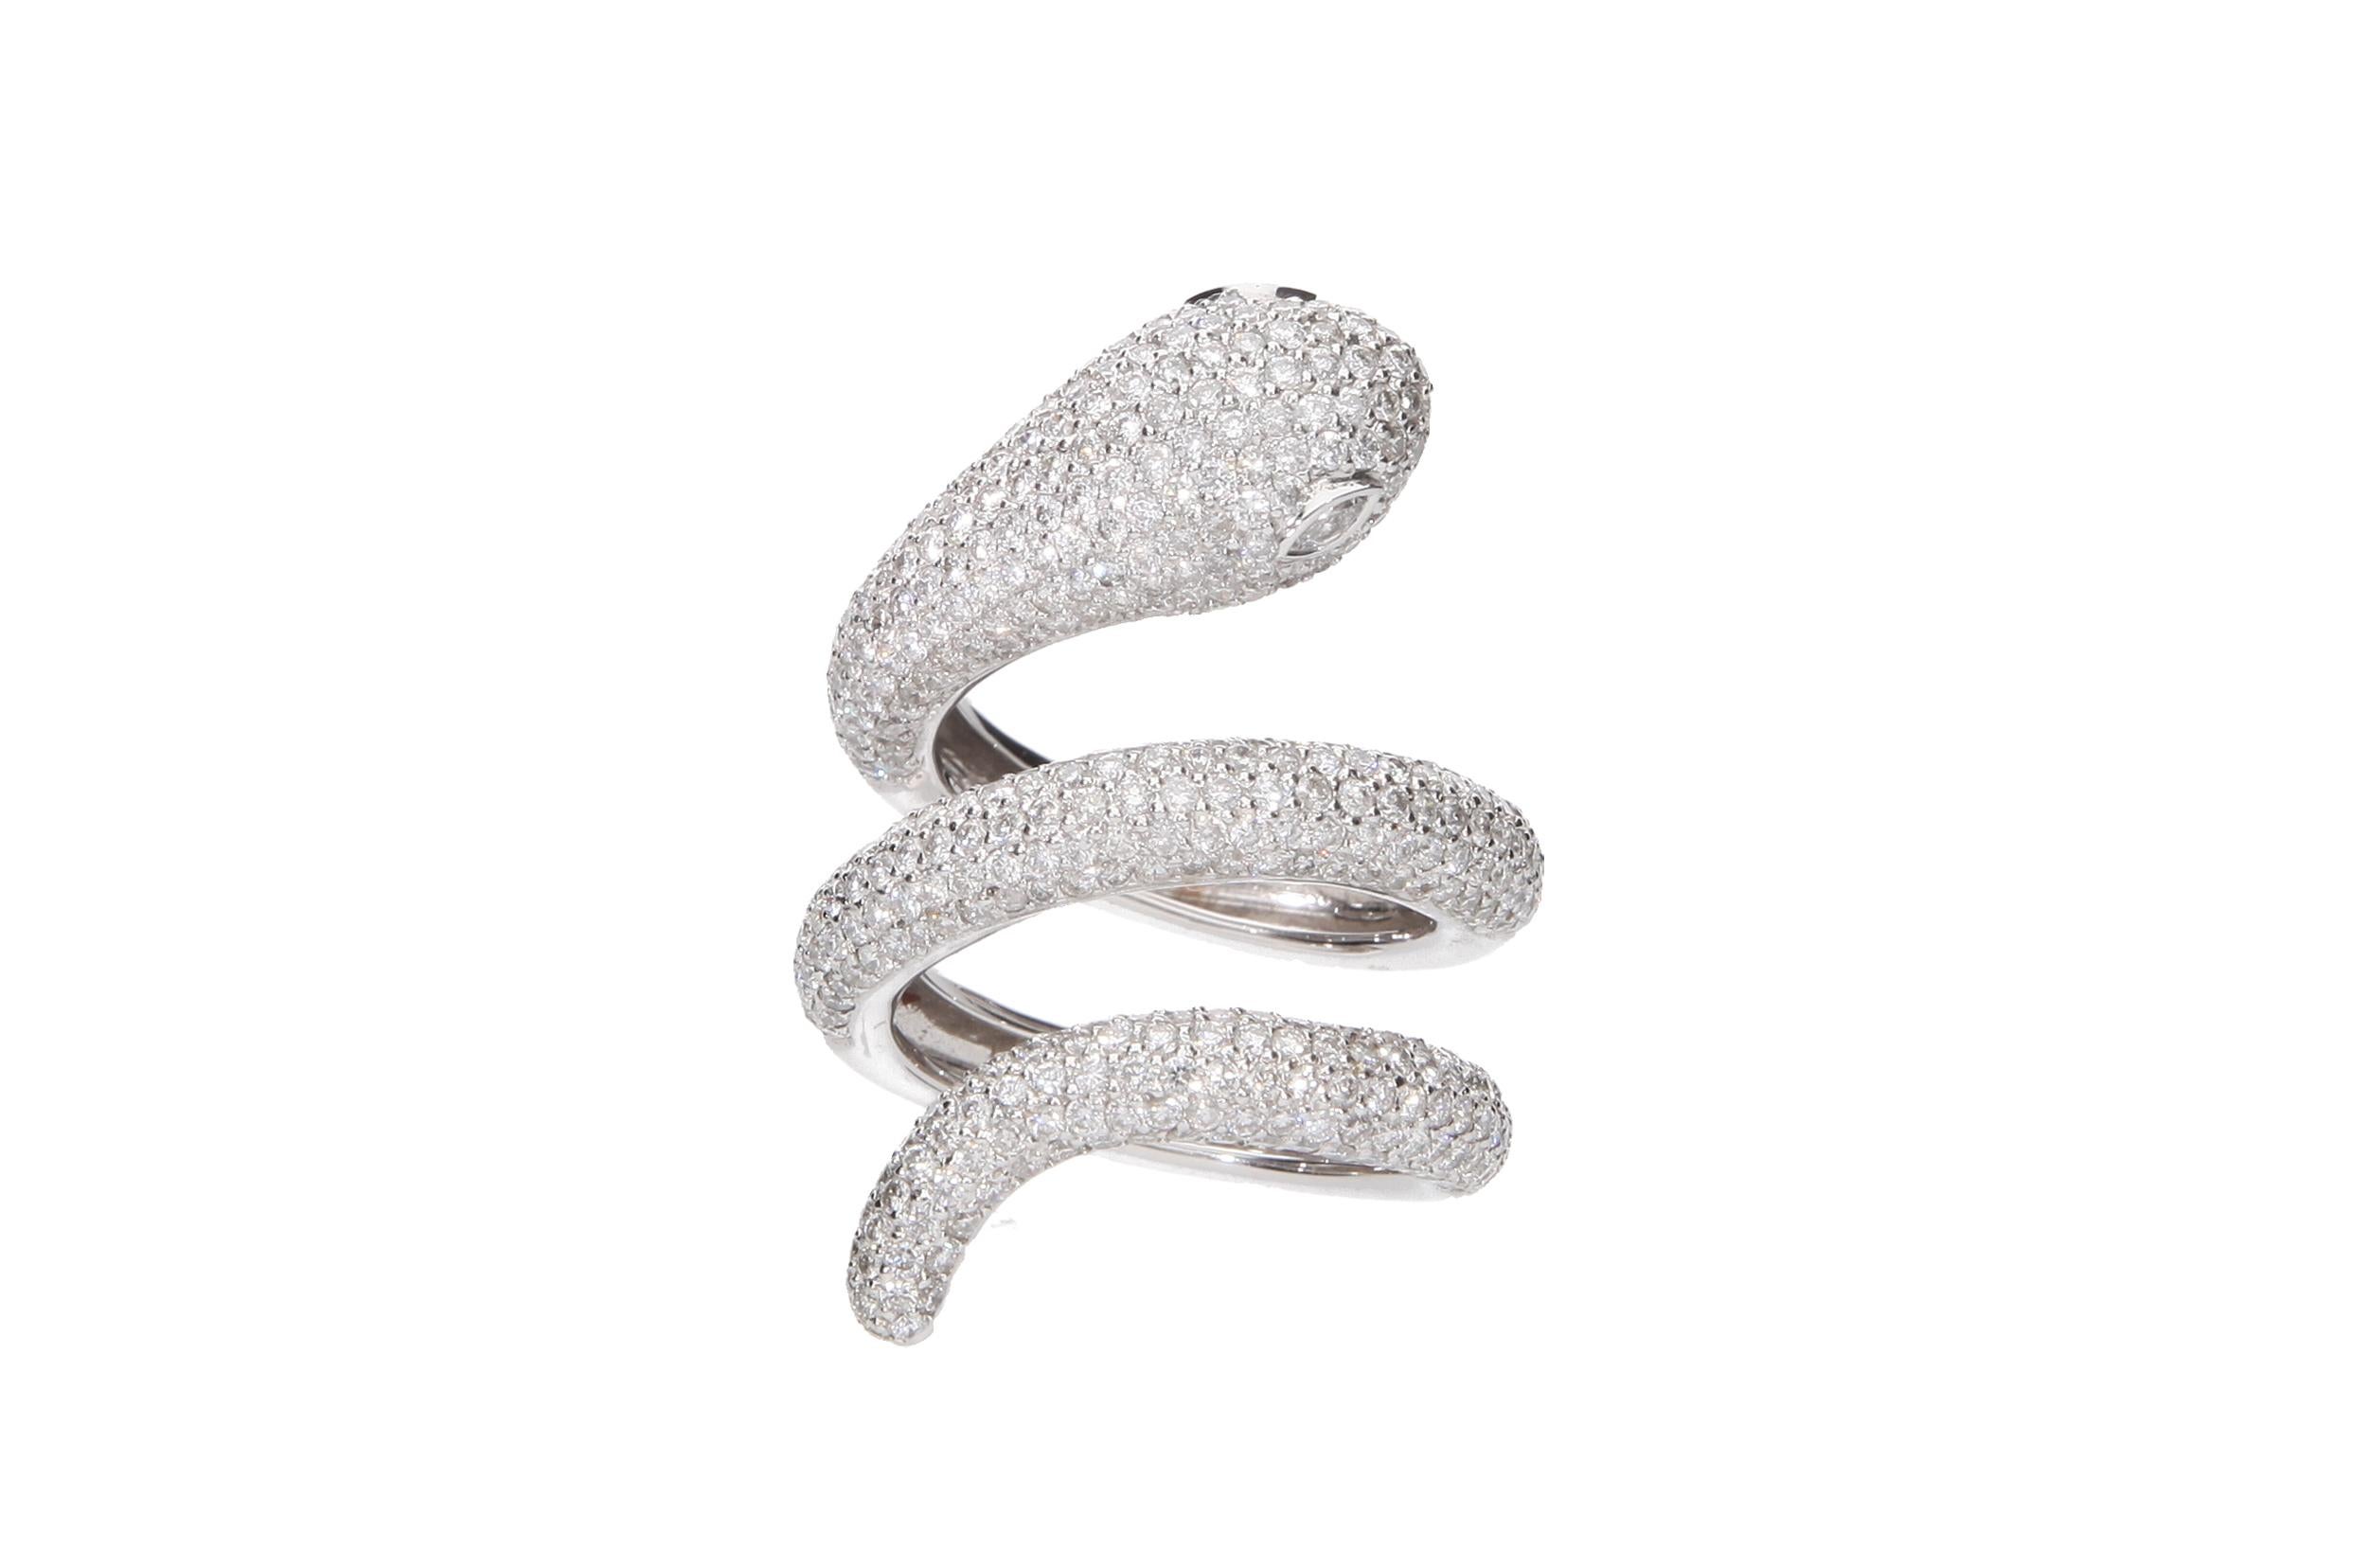 Diamonds ct 4.02. Snake Ring. 18 Kt White Gold. Made in Italy For Sale 1